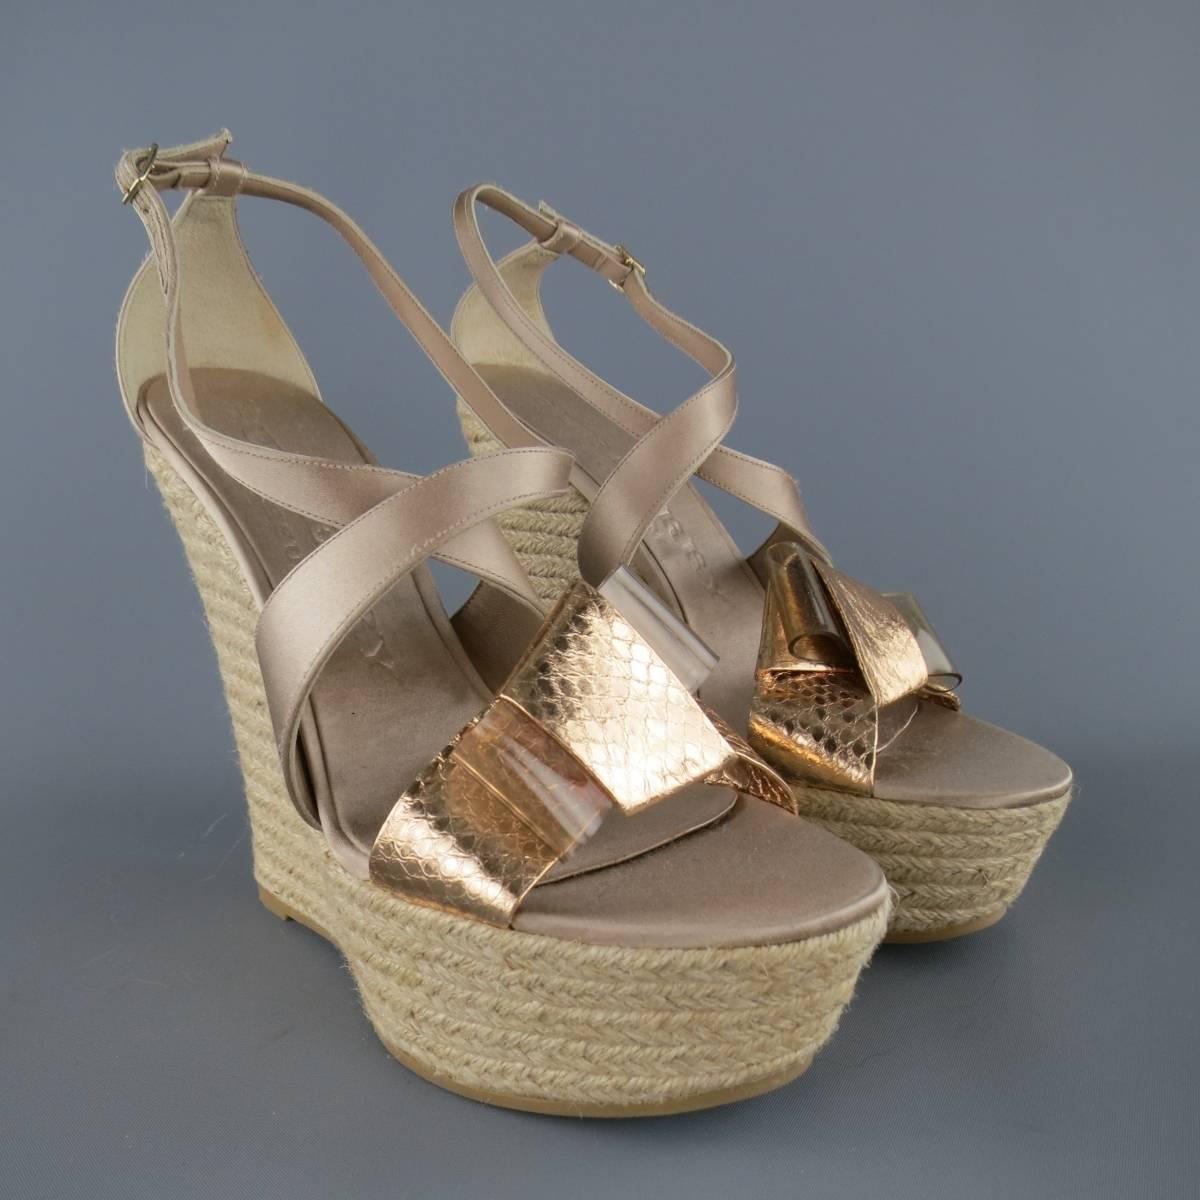 BURBERRY PRORSUM runway shoes feature a peachy beige silk satin X strap front, metallic rose gold snakeskin toe strap with clear PVC detailed bow, and platform espadrille wedge sole. Never worn. Made in Italy.
 
New Pre-Owned Condition.
Marked: IT